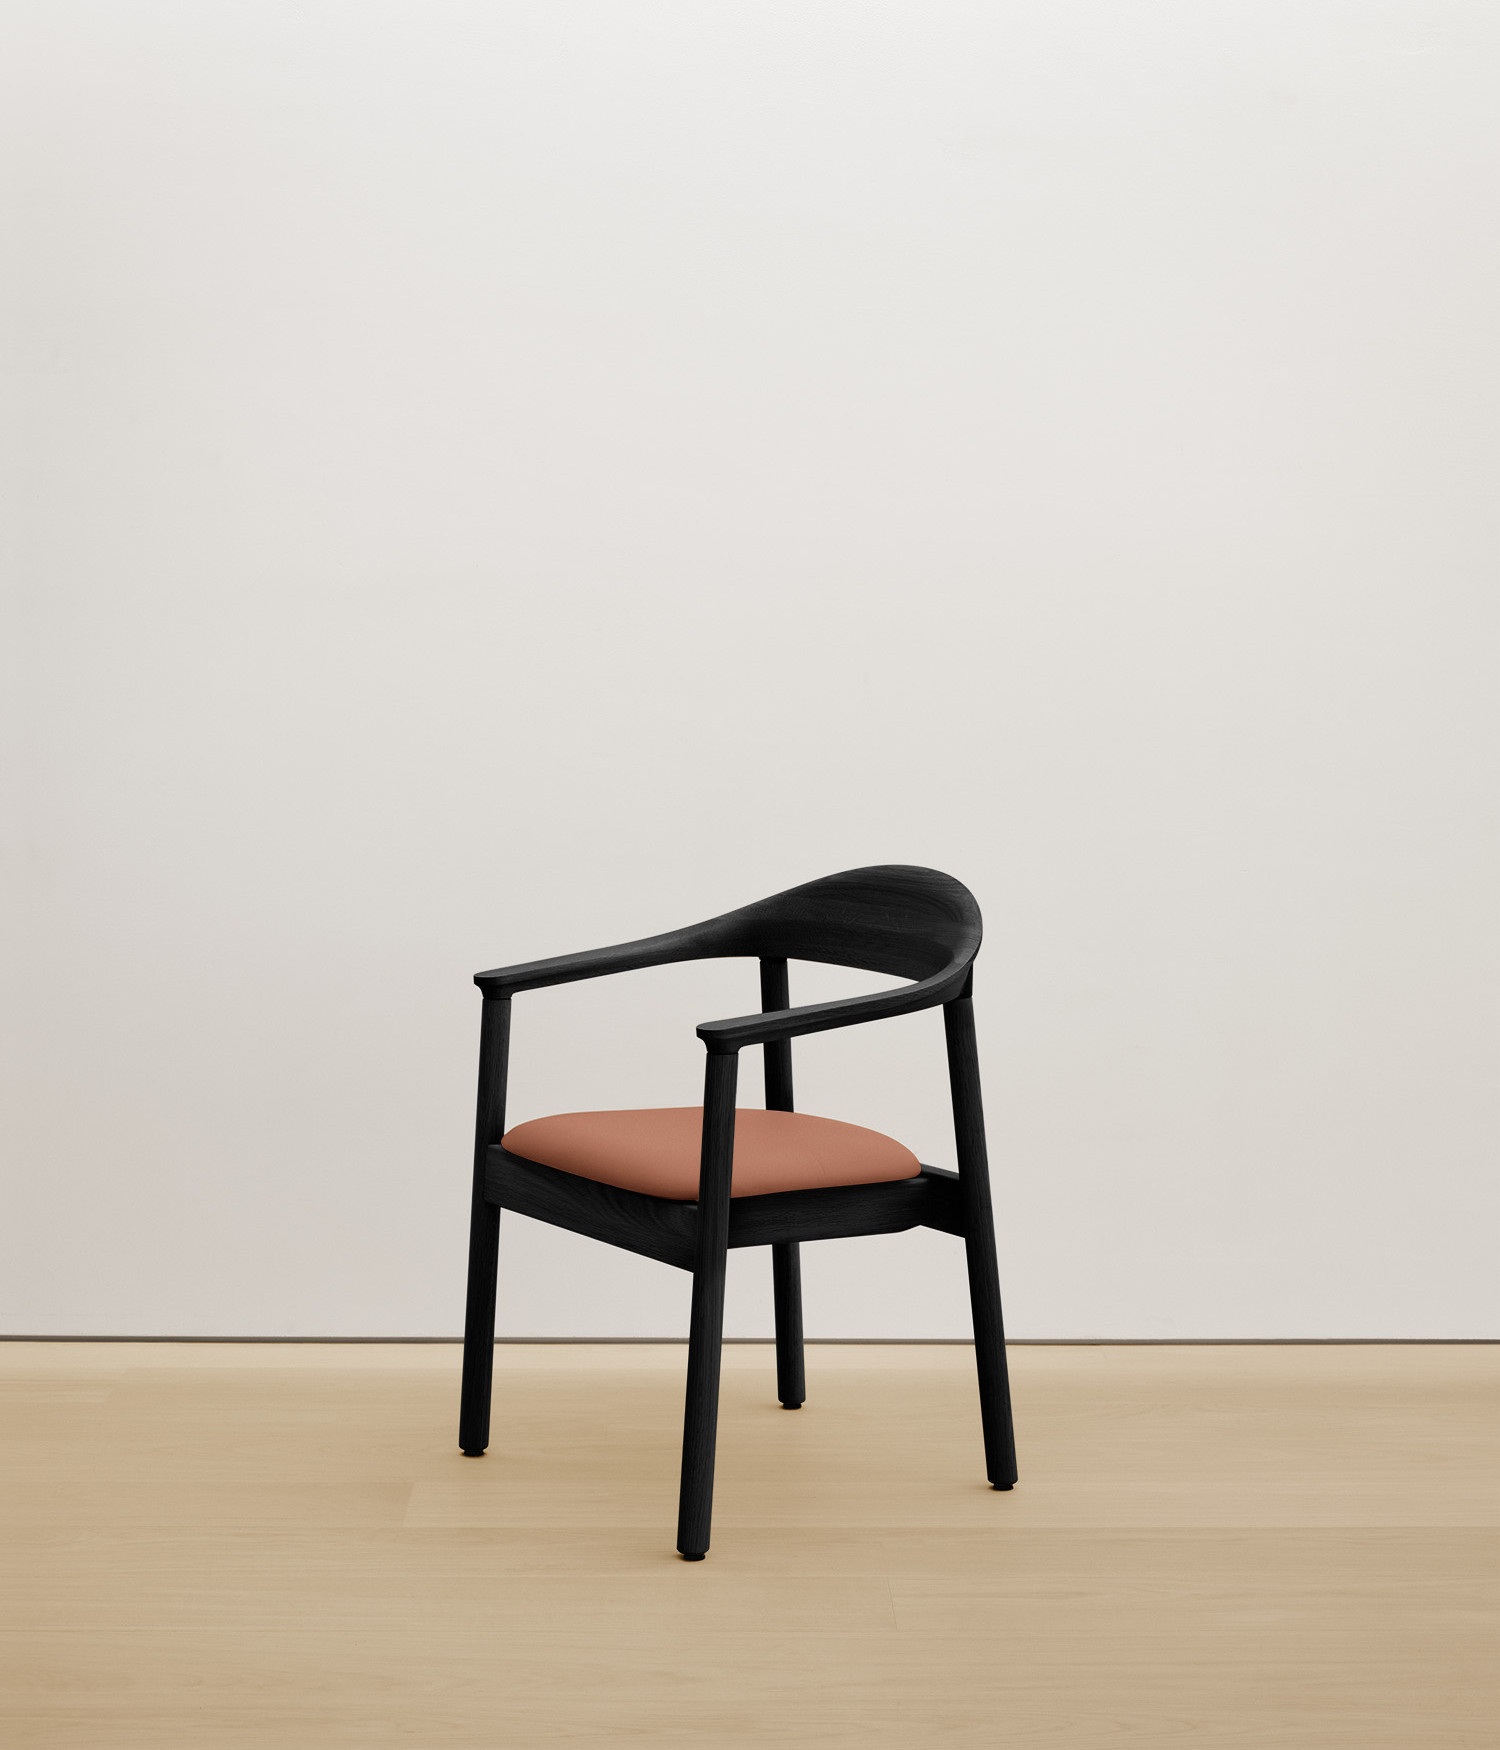  black-stained-oak chair with clay color upholstered seat